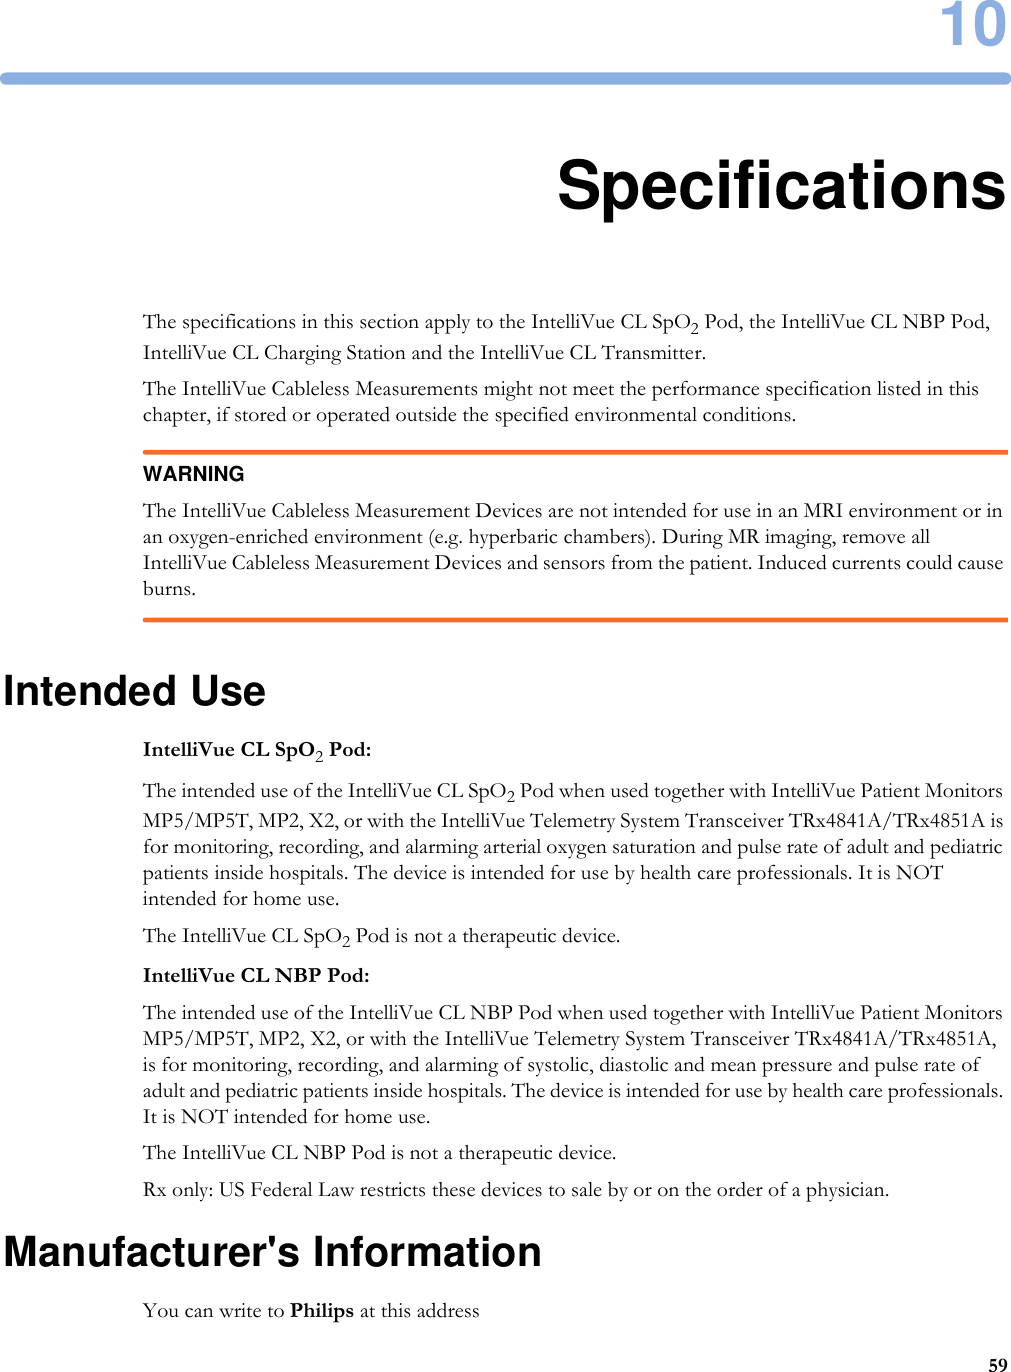 105910SpecificationsThe specifications in this section apply to the IntelliVue CL SpO2 Pod, the IntelliVue CL NBP Pod, IntelliVue CL Charging Station and the IntelliVue CL Transmitter.The IntelliVue Cableless Measurements might not meet the performance specification listed in this chapter, if stored or operated outside the specified environmental conditions.WARNINGThe IntelliVue Cableless Measurement Devices are not intended for use in an MRI environment or in an oxygen-enriched environment (e.g. hyperbaric chambers). During MR imaging, remove all IntelliVue Cableless Measurement Devices and sensors from the patient. Induced currents could cause burns.Intended UseIntelliVue CL SpO2 Pod:The intended use of the IntelliVue CL SpO2 Pod when used together with IntelliVue Patient Monitors MP5/MP5T, MP2, X2, or with the IntelliVue Telemetry System Transceiver TRx4841A/TRx4851A is for monitoring, recording, and alarming arterial oxygen saturation and pulse rate of adult and pediatric patients inside hospitals. The device is intended for use by health care professionals. It is NOT intended for home use.The IntelliVue CL SpO2 Pod is not a therapeutic device.IntelliVue CL NBP Pod:The intended use of the IntelliVue CL NBP Pod when used together with IntelliVue Patient Monitors MP5/MP5T, MP2, X2, or with the IntelliVue Telemetry System Transceiver TRx4841A/TRx4851A, is for monitoring, recording, and alarming of systolic, diastolic and mean pressure and pulse rate of adult and pediatric patients inside hospitals. The device is intended for use by health care professionals. It is NOT intended for home use.The IntelliVue CL NBP Pod is not a therapeutic device.Rx only: US Federal Law restricts these devices to sale by or on the order of a physician.Manufacturer&apos;s InformationYou can write to Philips at this address